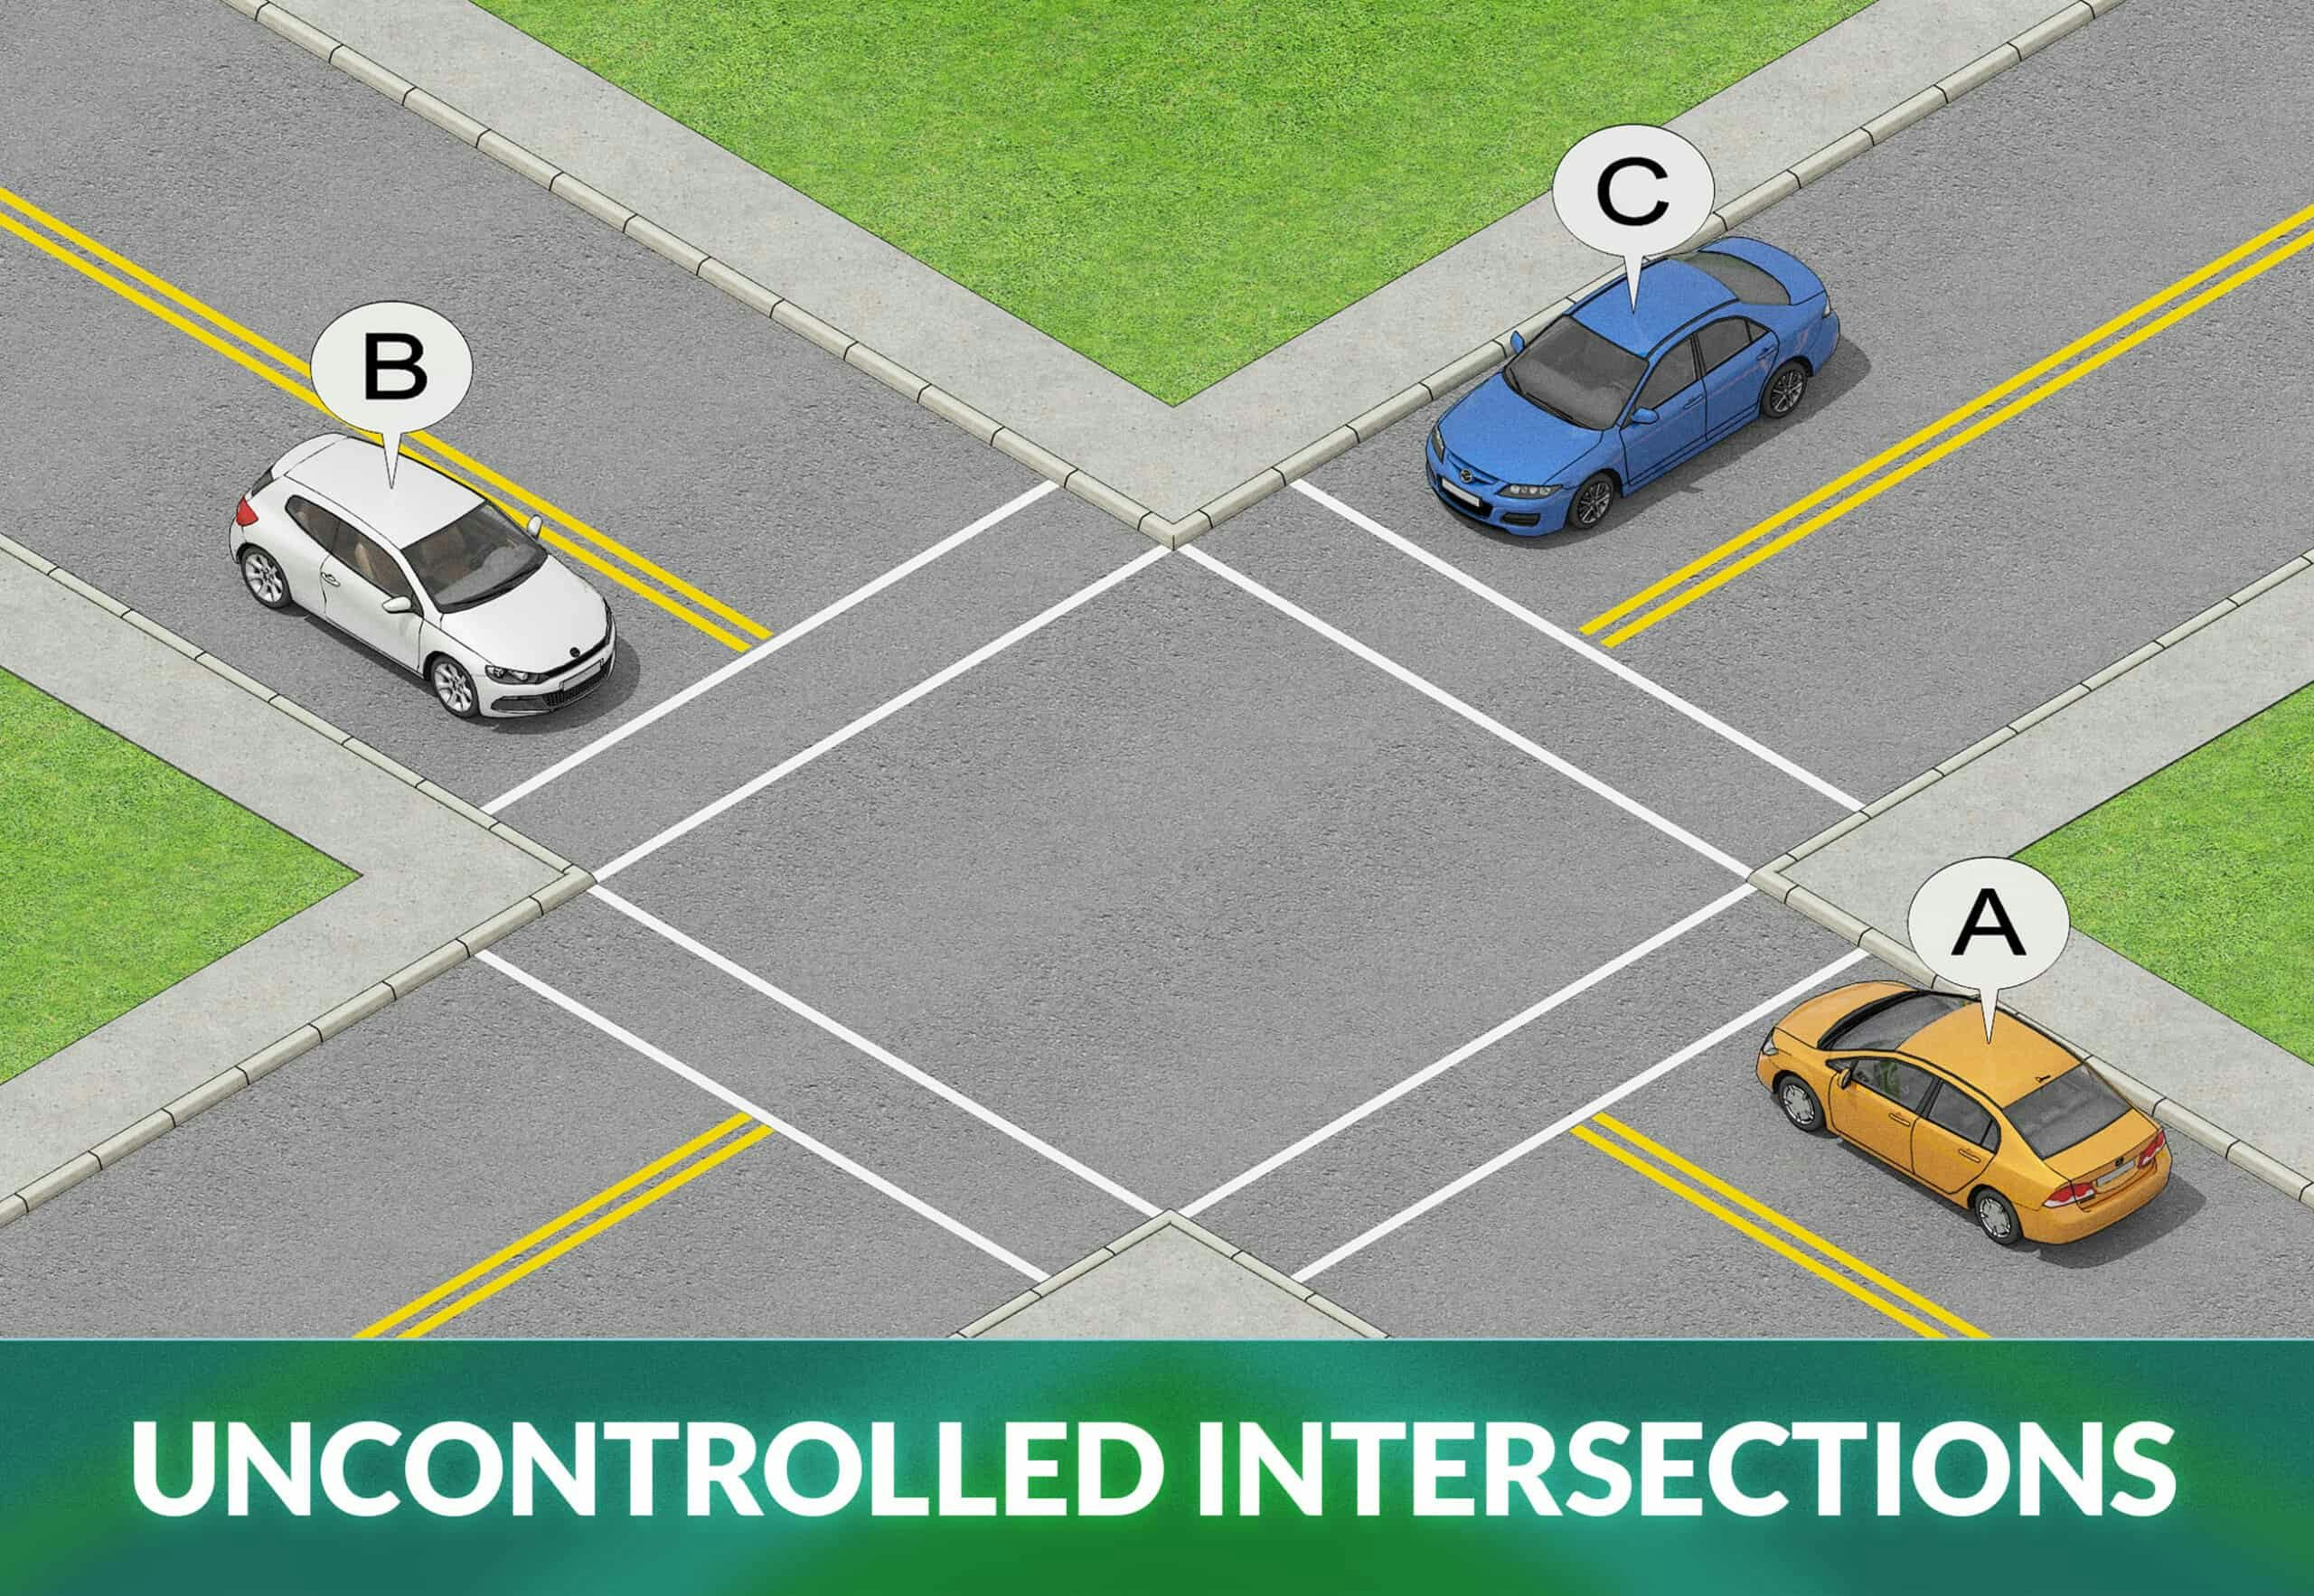 Uncontrolled Intersections Right Of Way Rules: Who Yields?